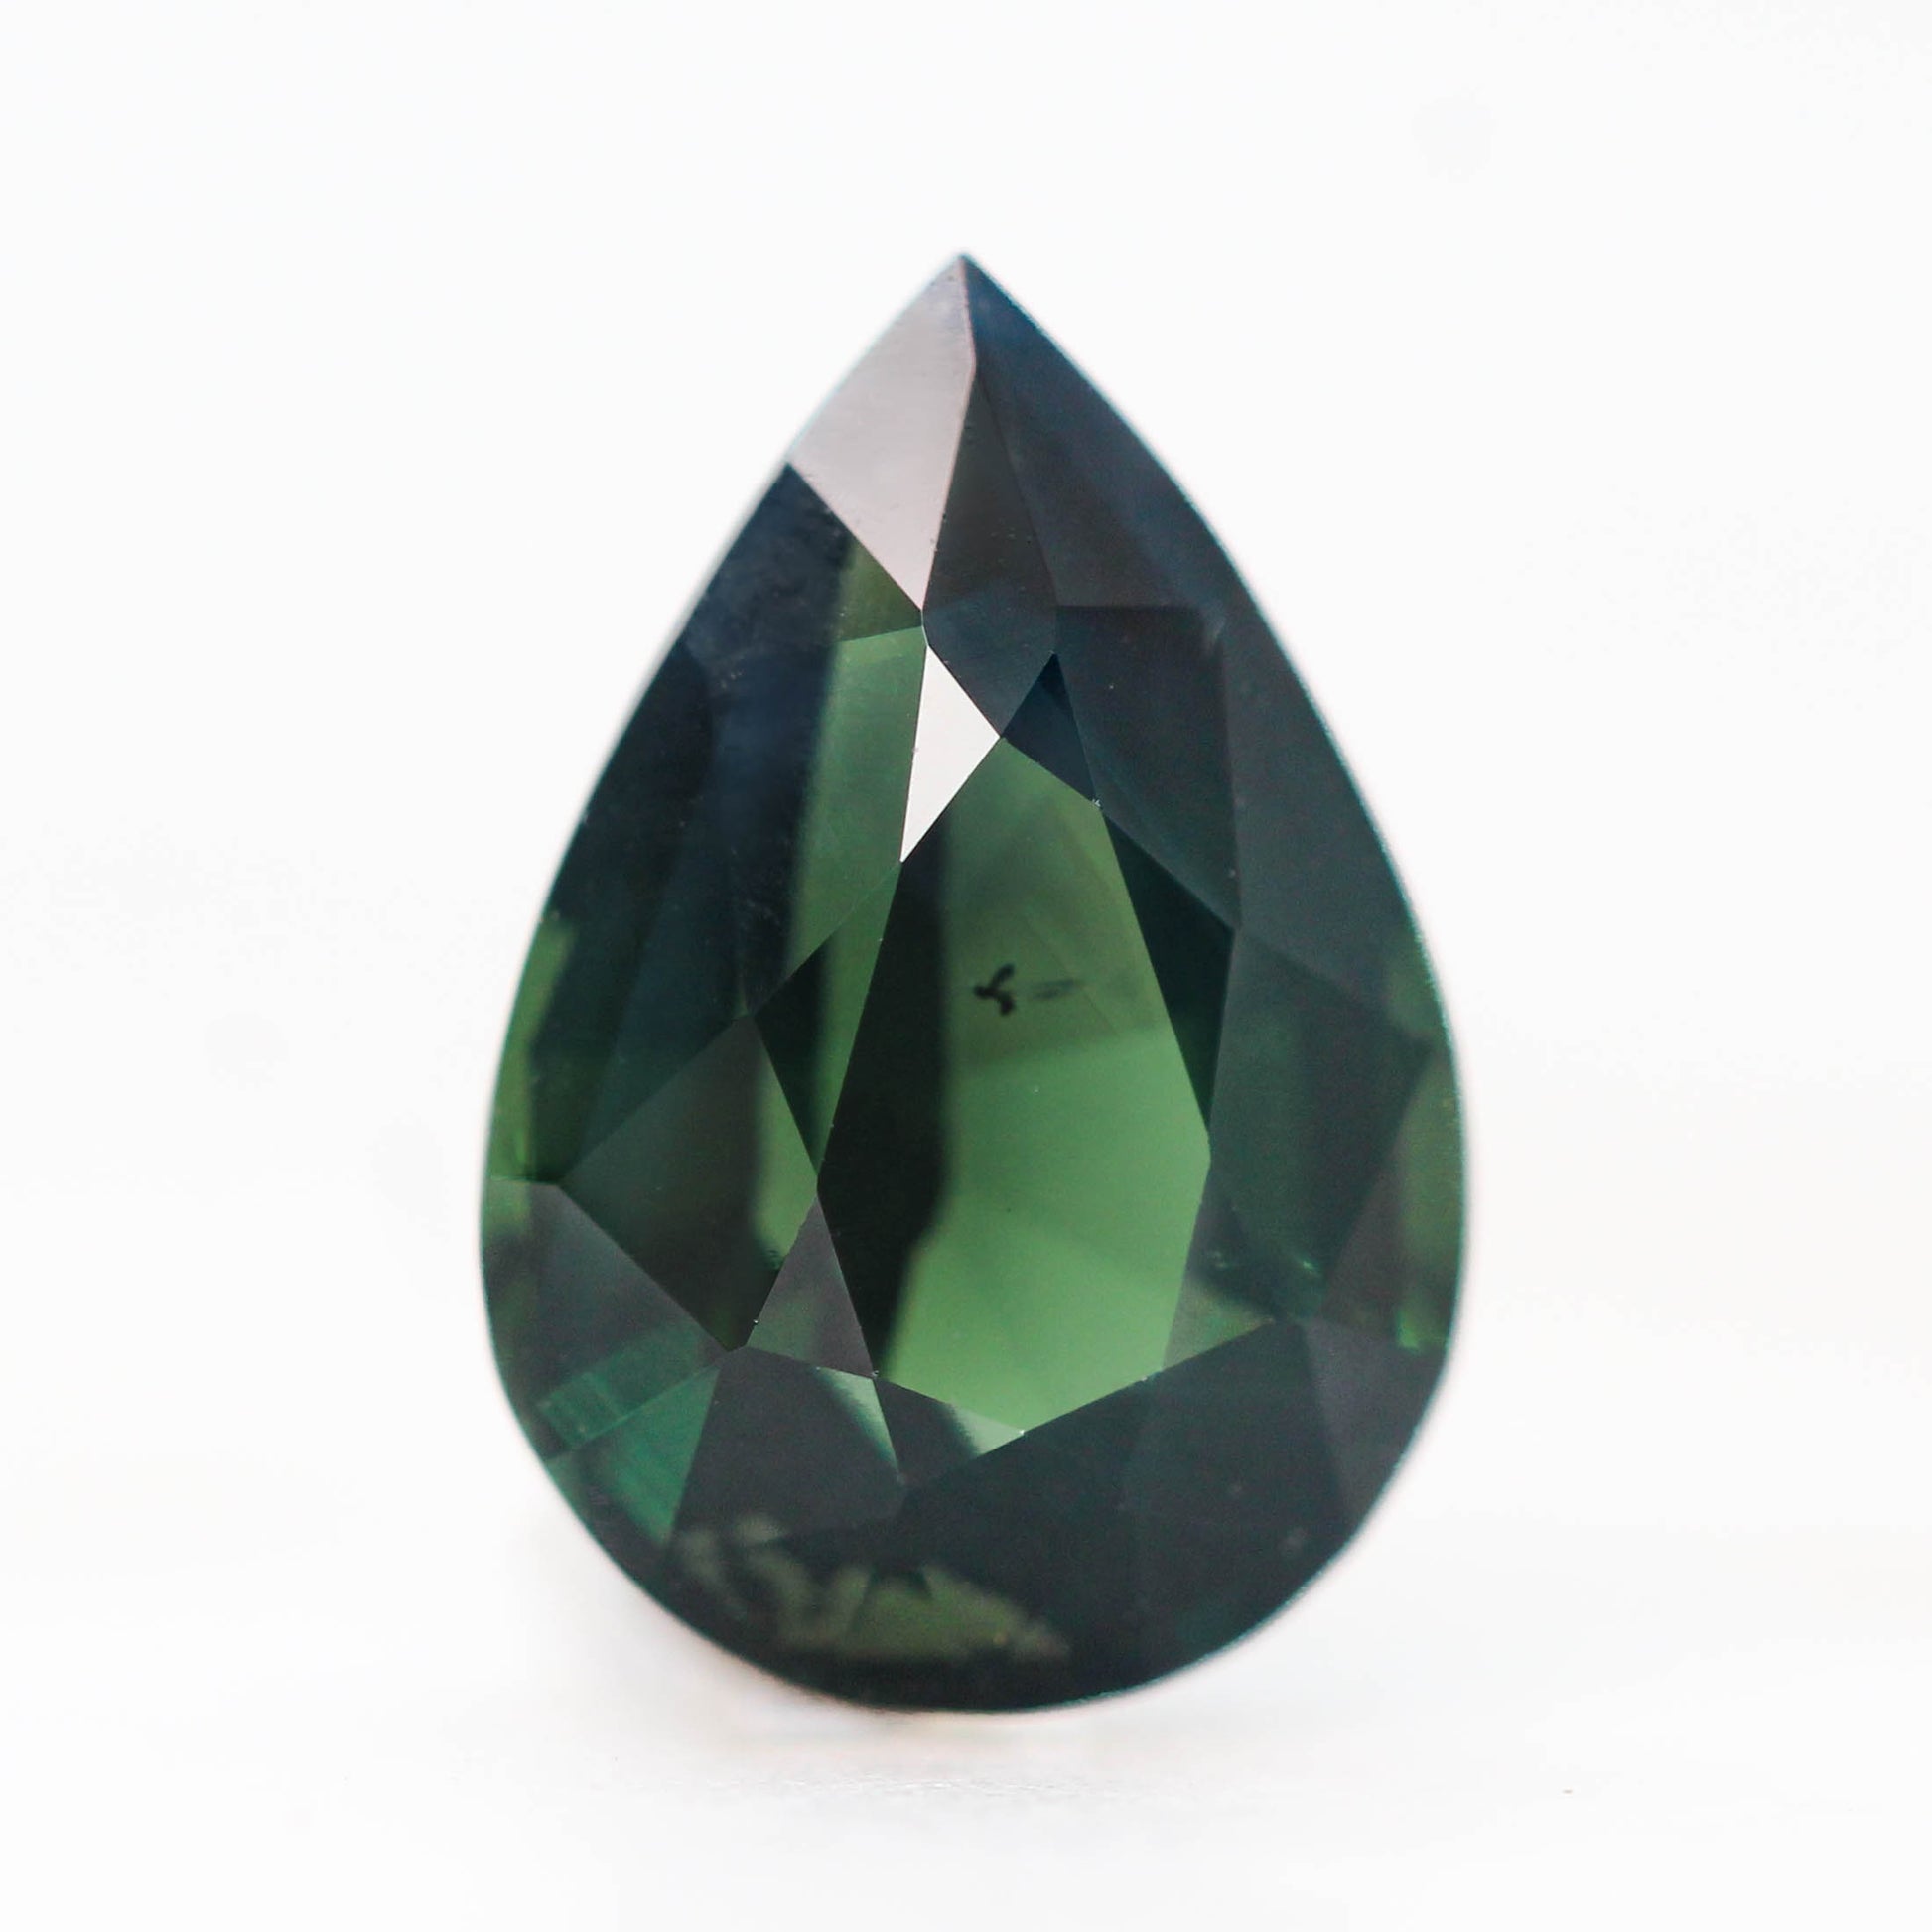 2.85 Carat Certified Dark Green Pear Sapphire for Custom Work - Inventory Code GPS285 - Midwinter Co. Alternative Bridal Rings and Modern Fine Jewelry